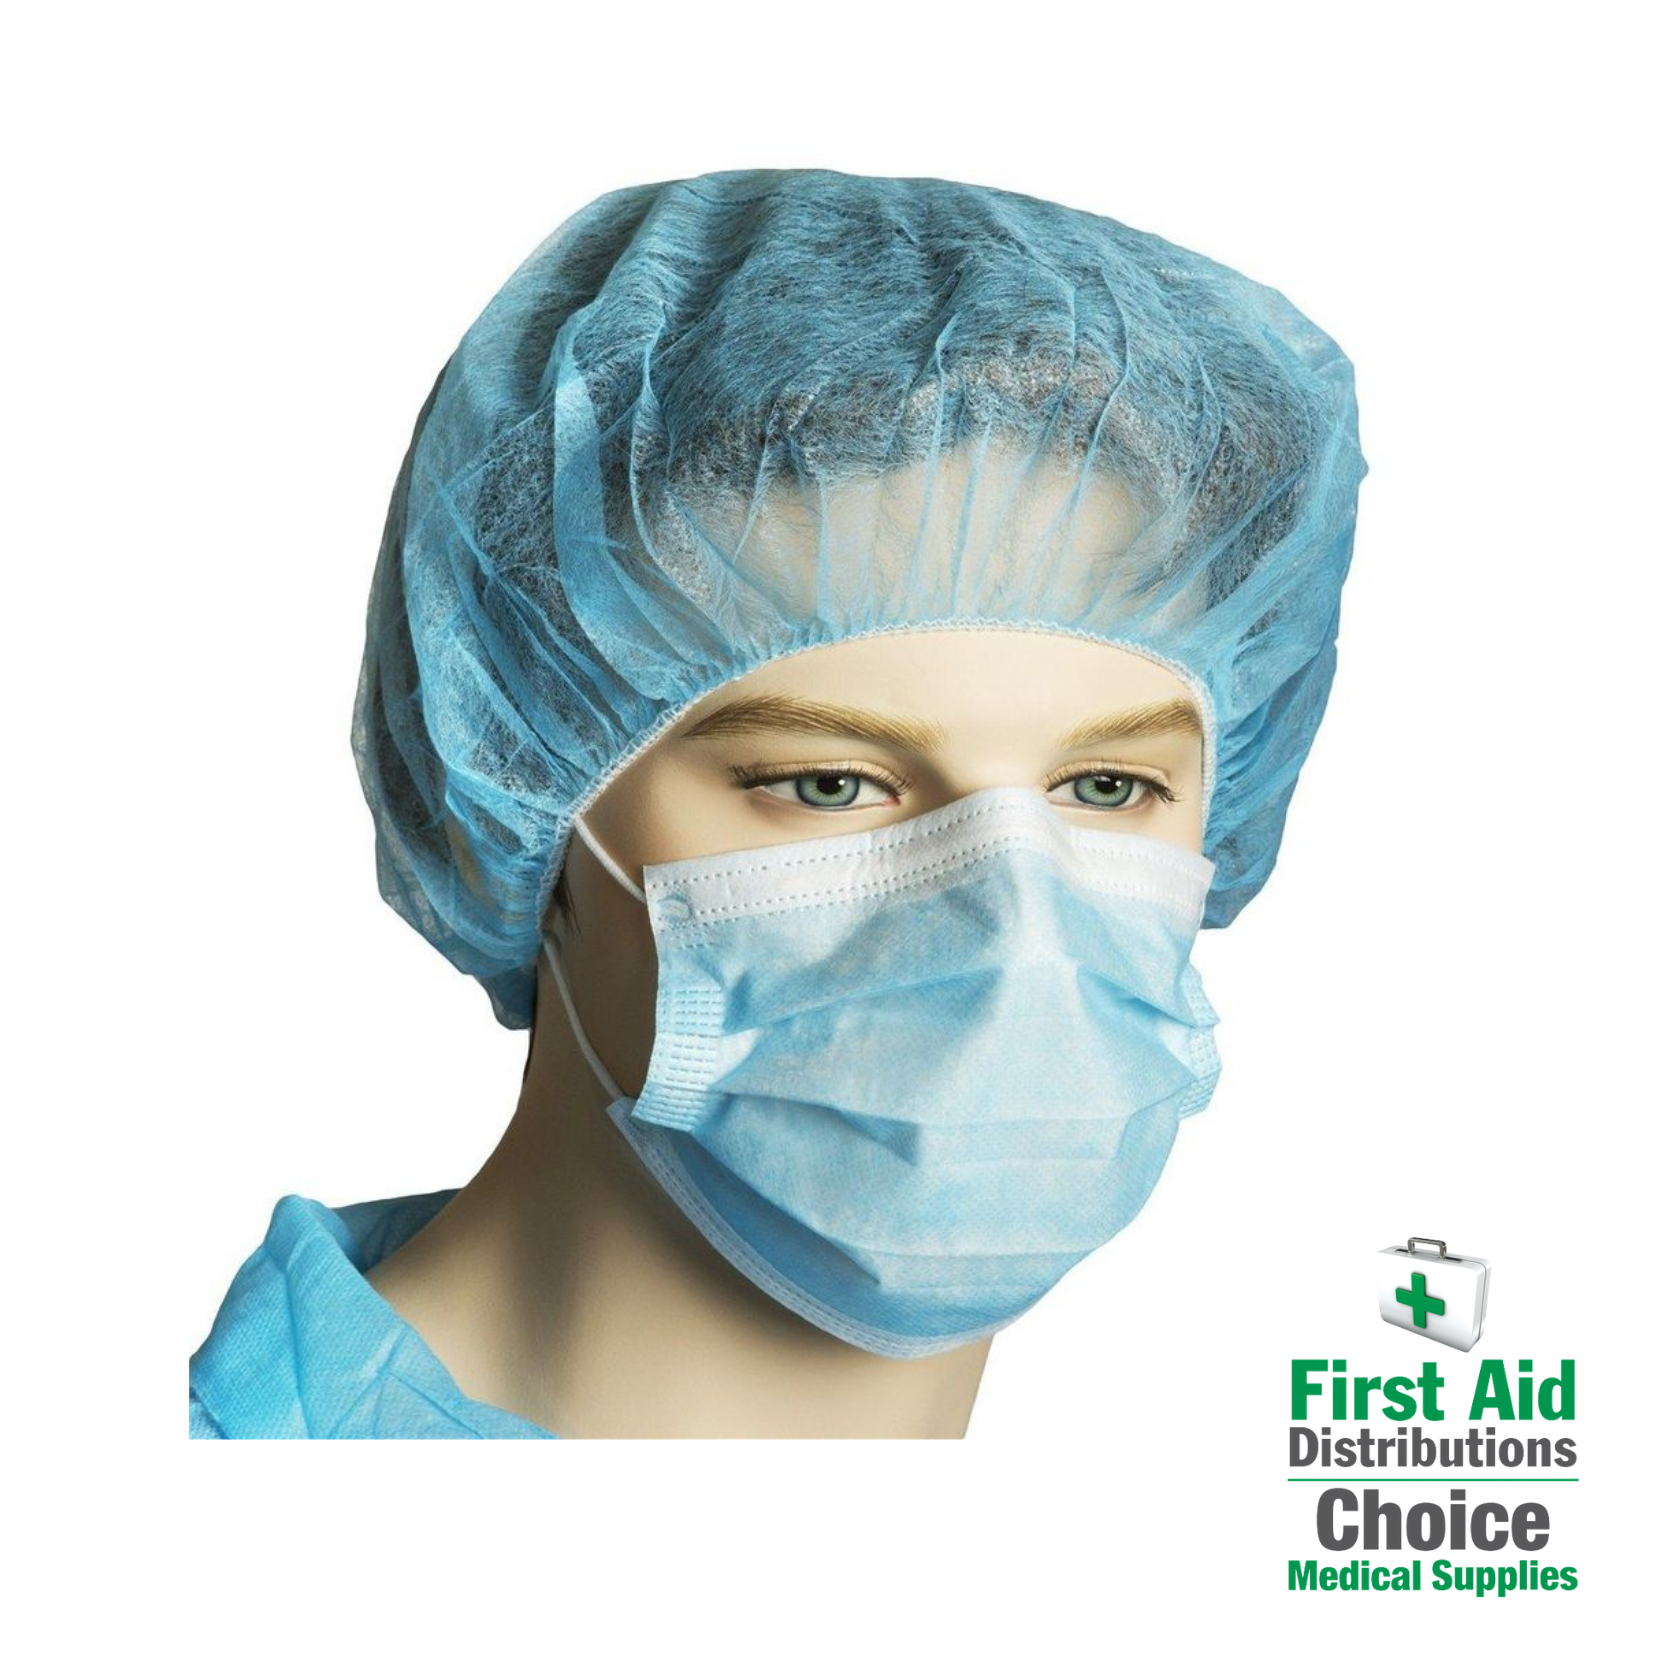 collections/Surgical_Mask_Single_First_Aid_Distributions.png